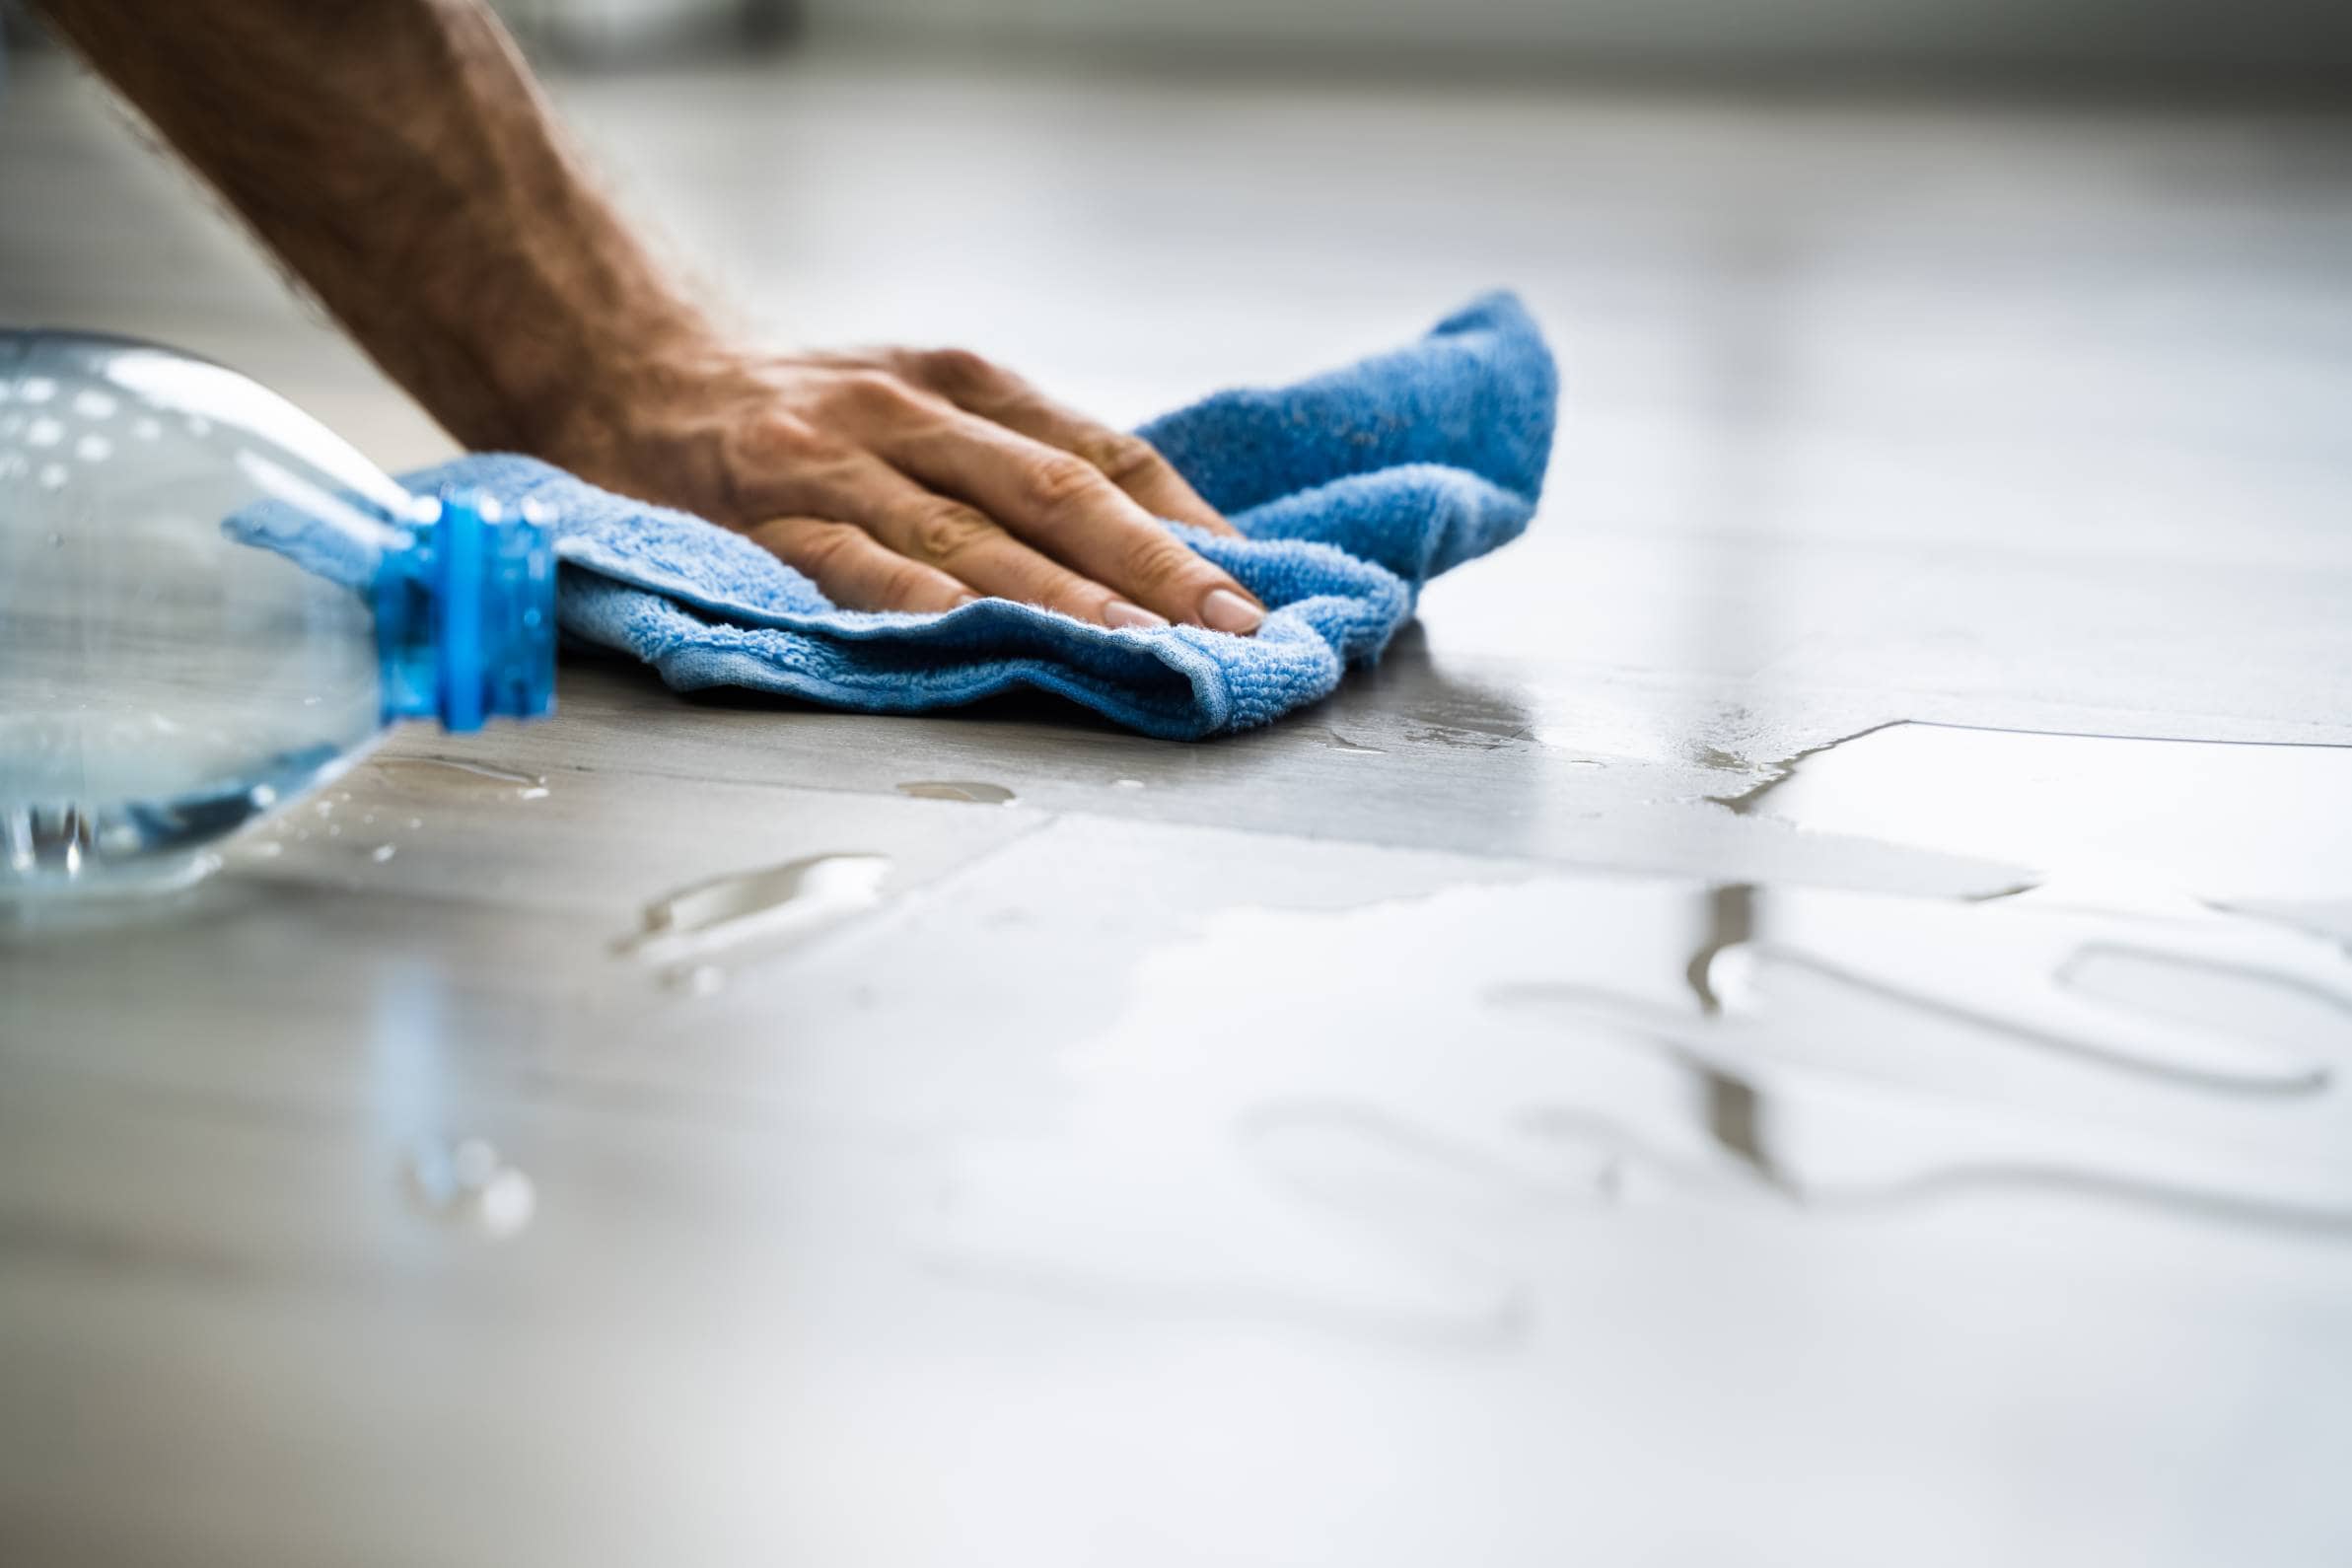 How To Fix Laminate Floor Water Damage In 5 Simple Steps